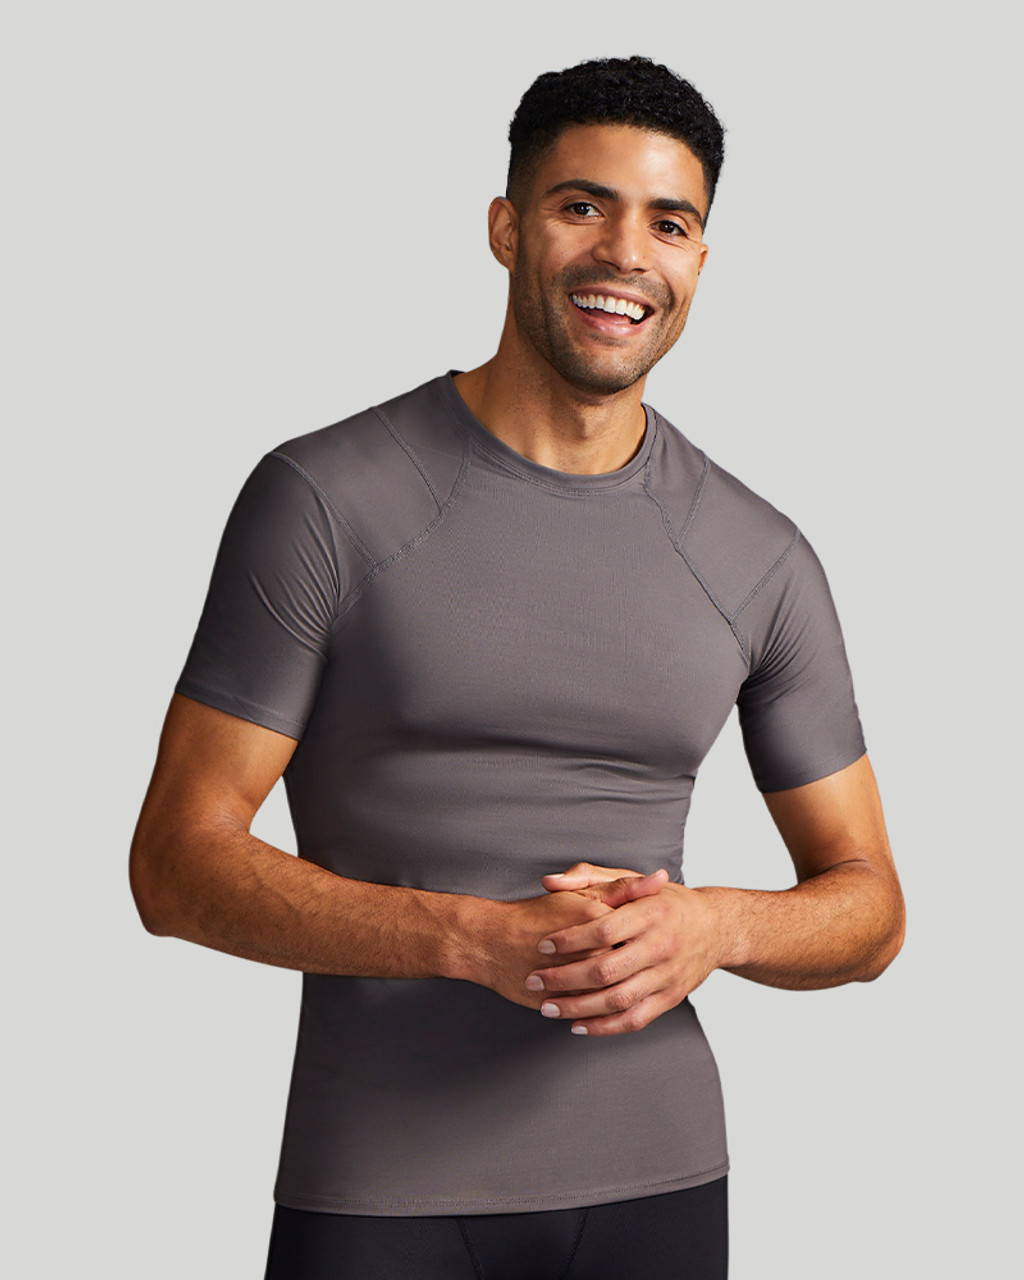 A man wearing a grey Tommie Copper Short Sleeve Shoulder Support Shirt